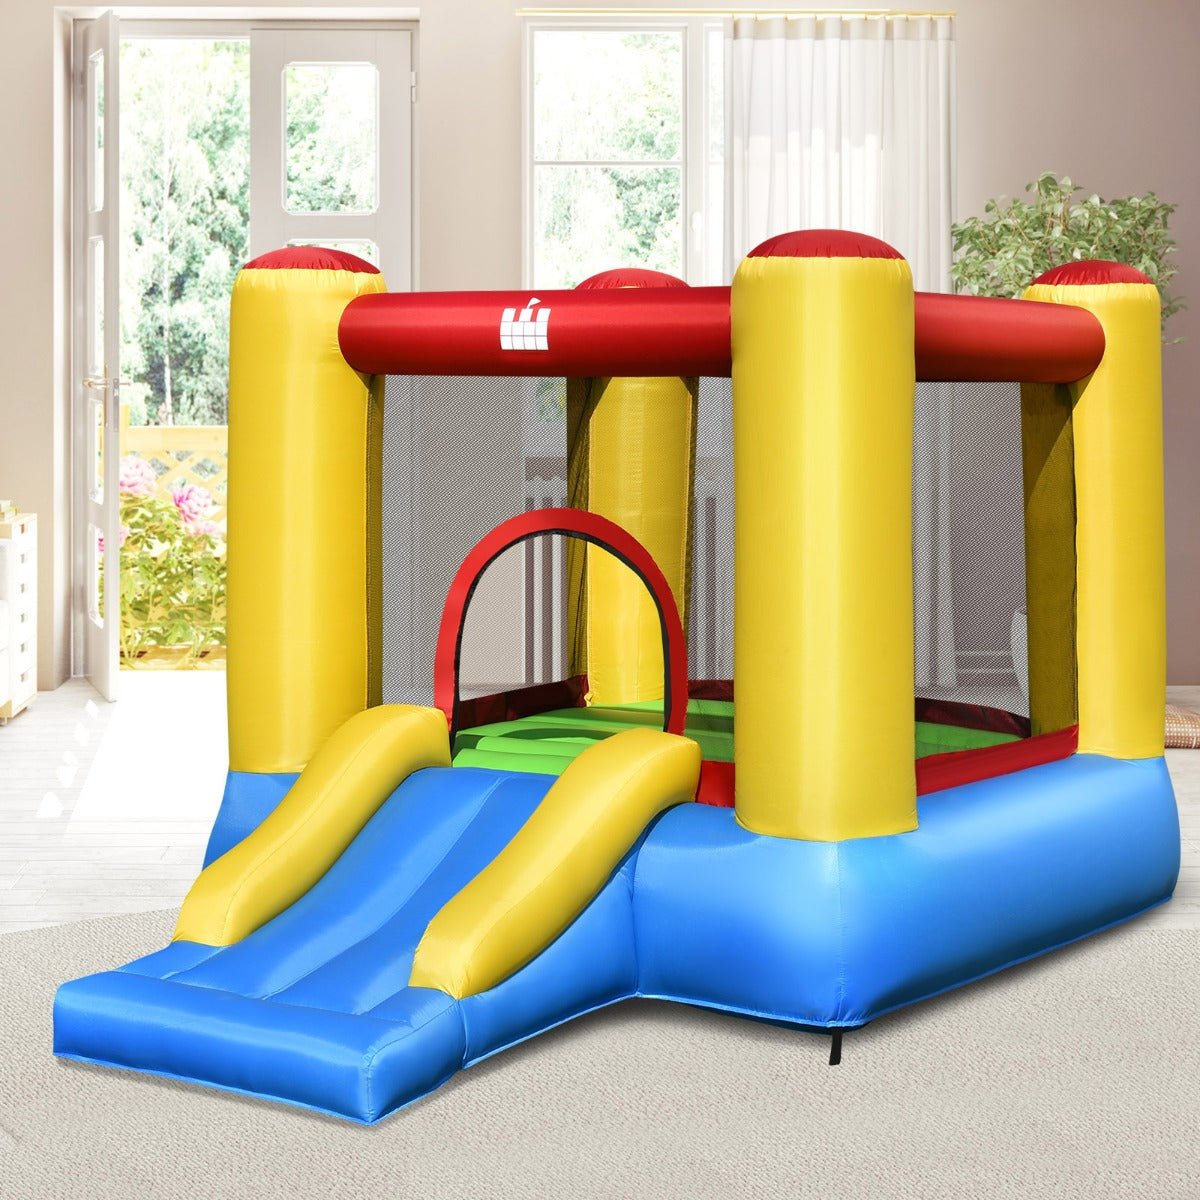 Playful Thrills: Inflatable Bounce House with Slide for Active Children